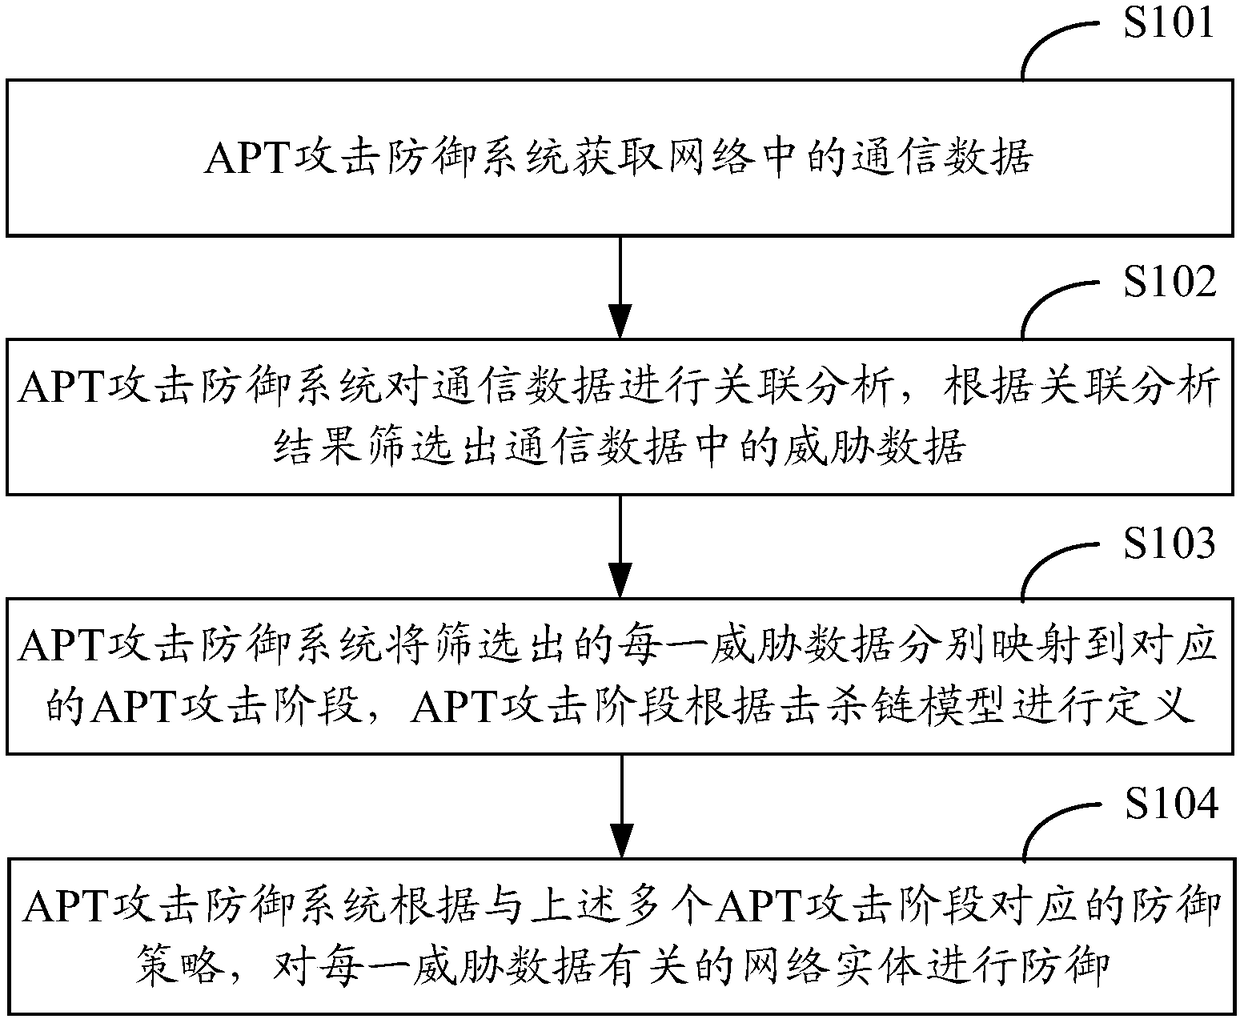 Method and system for defense against APT attacks